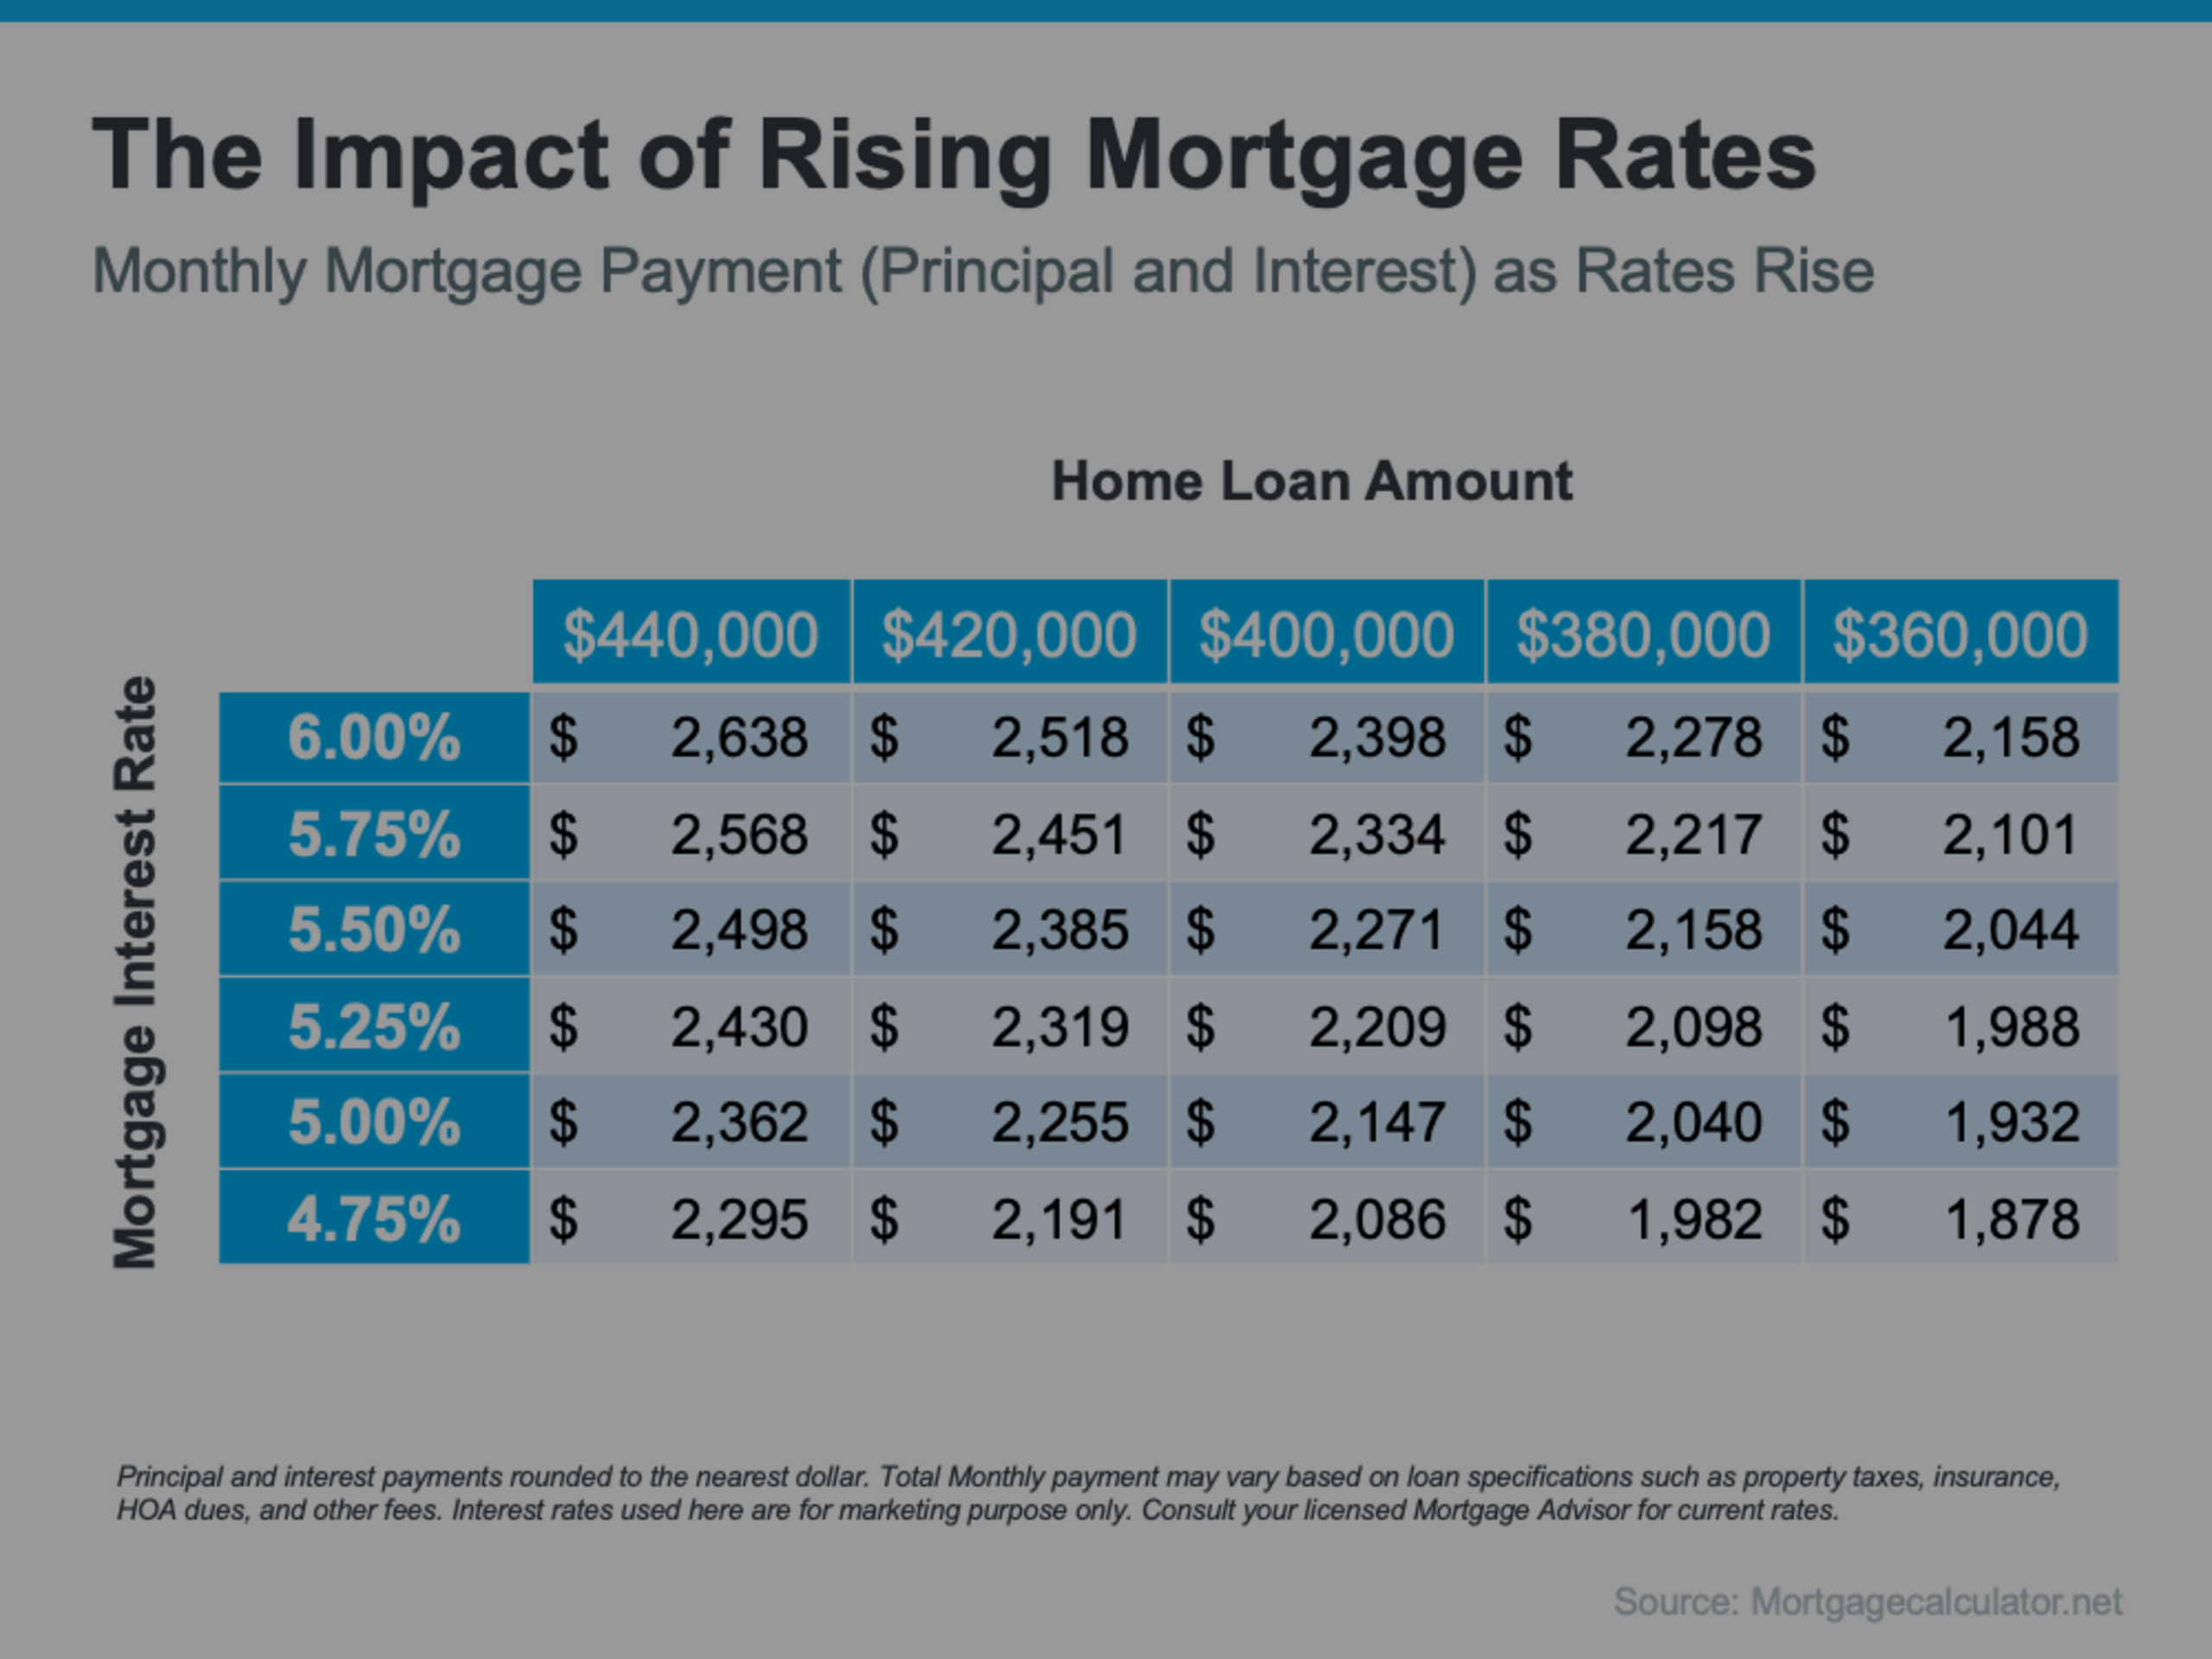 How To Approach Rising Mortgage Rates as a Buyer